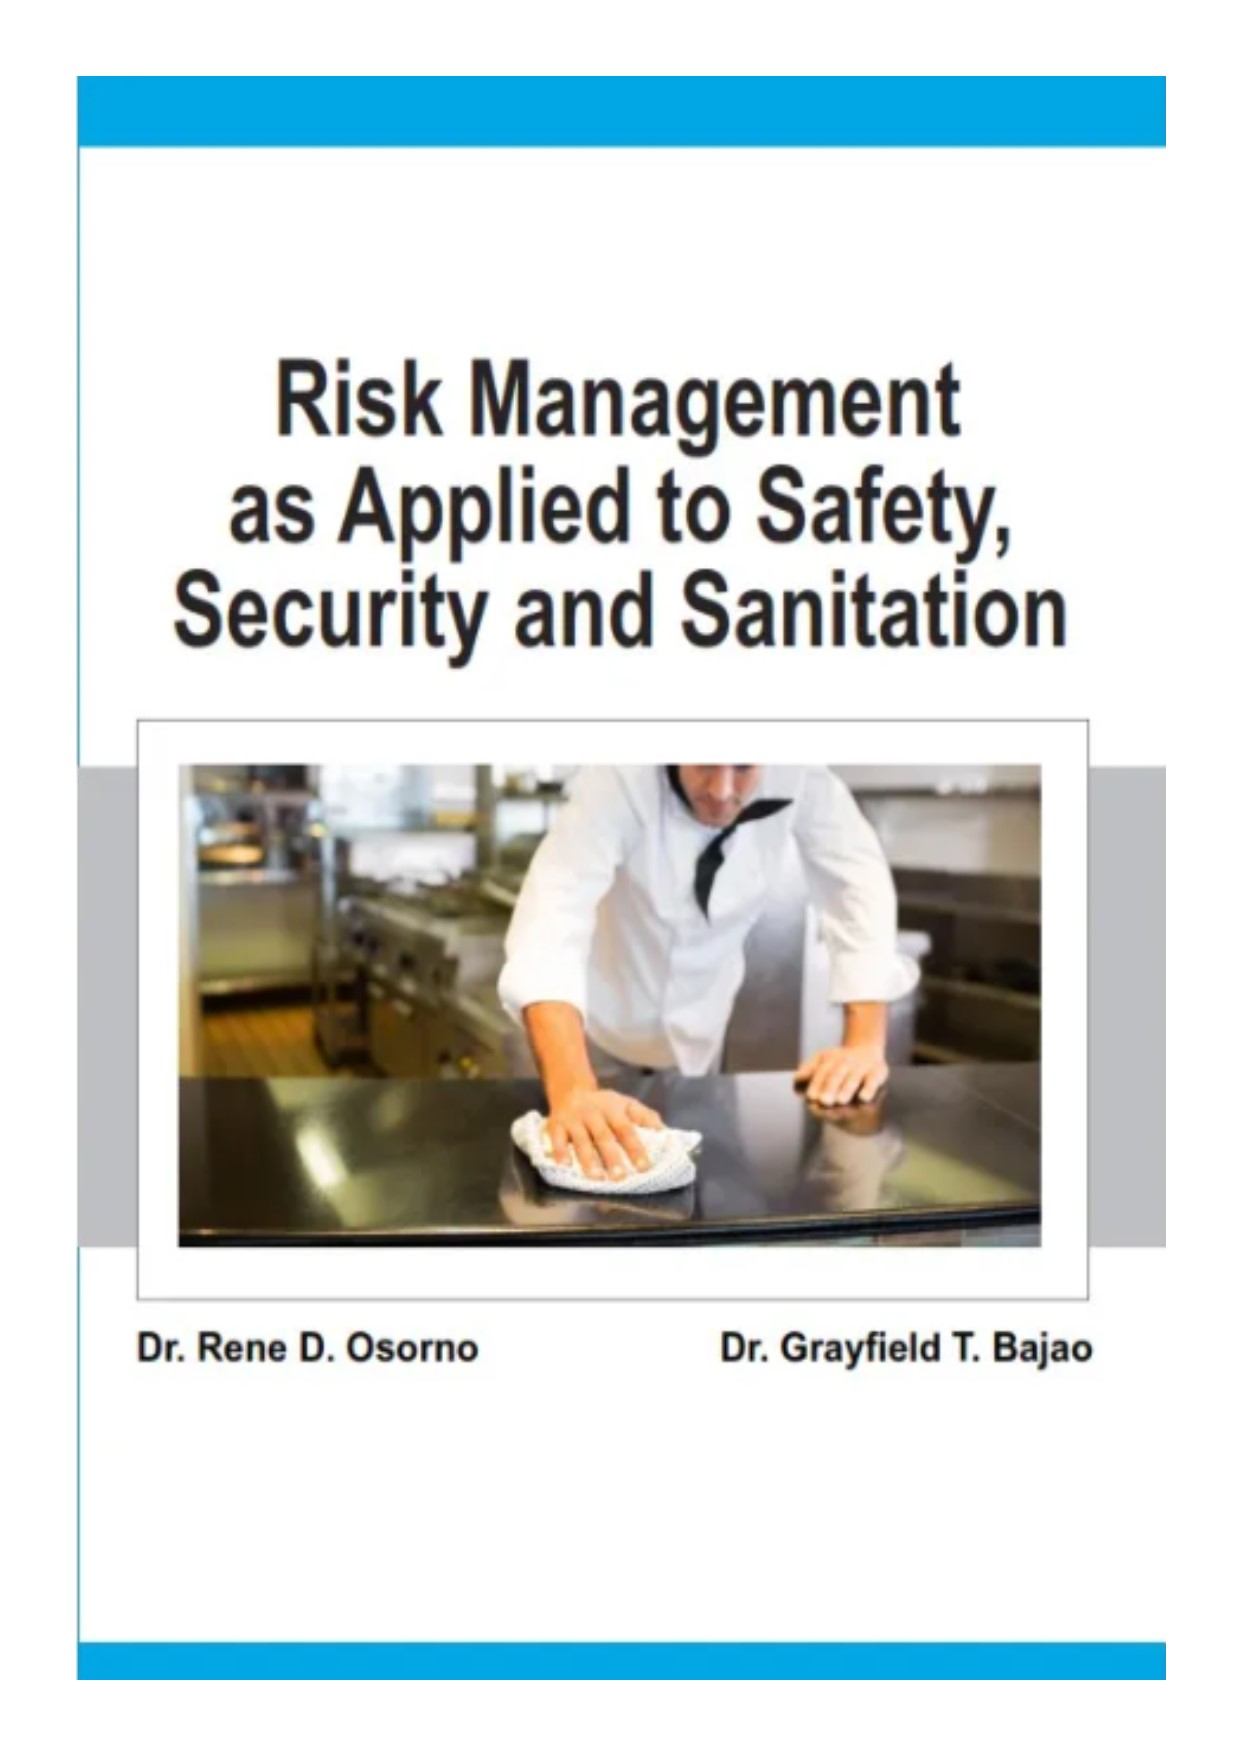 Risk management as applied to safety, security and sanitation